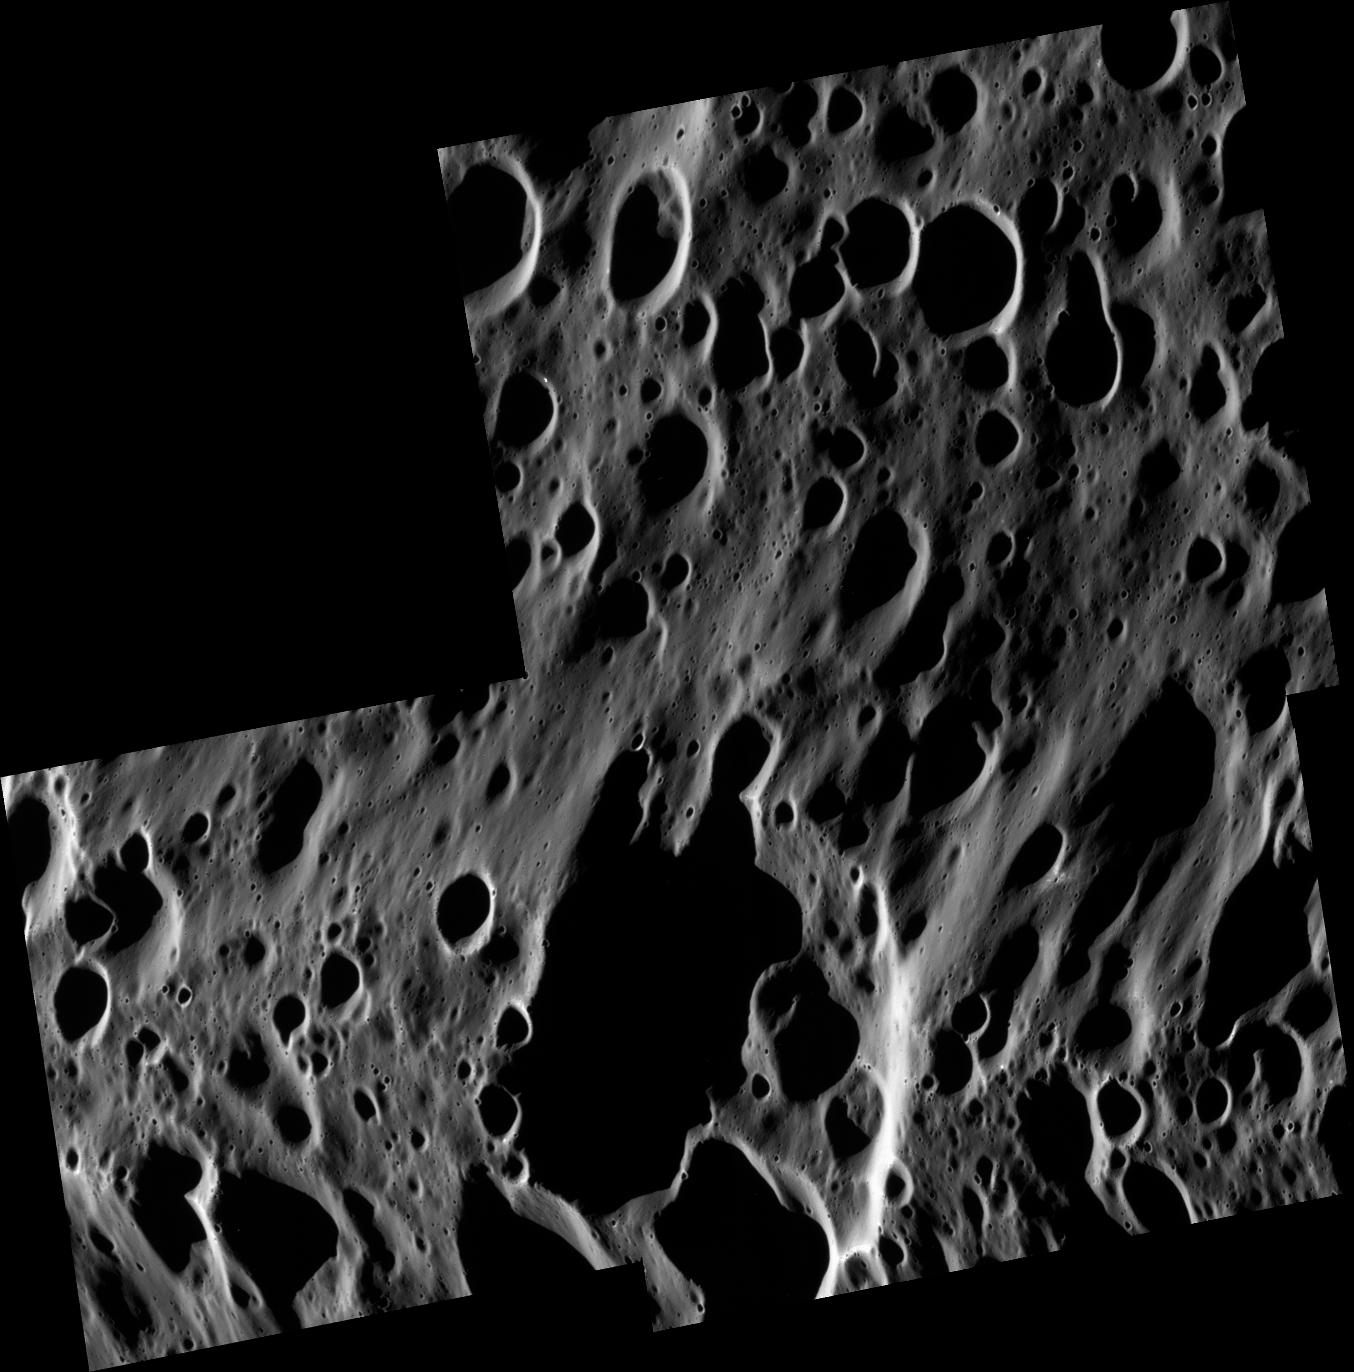 Craters on Iapetus